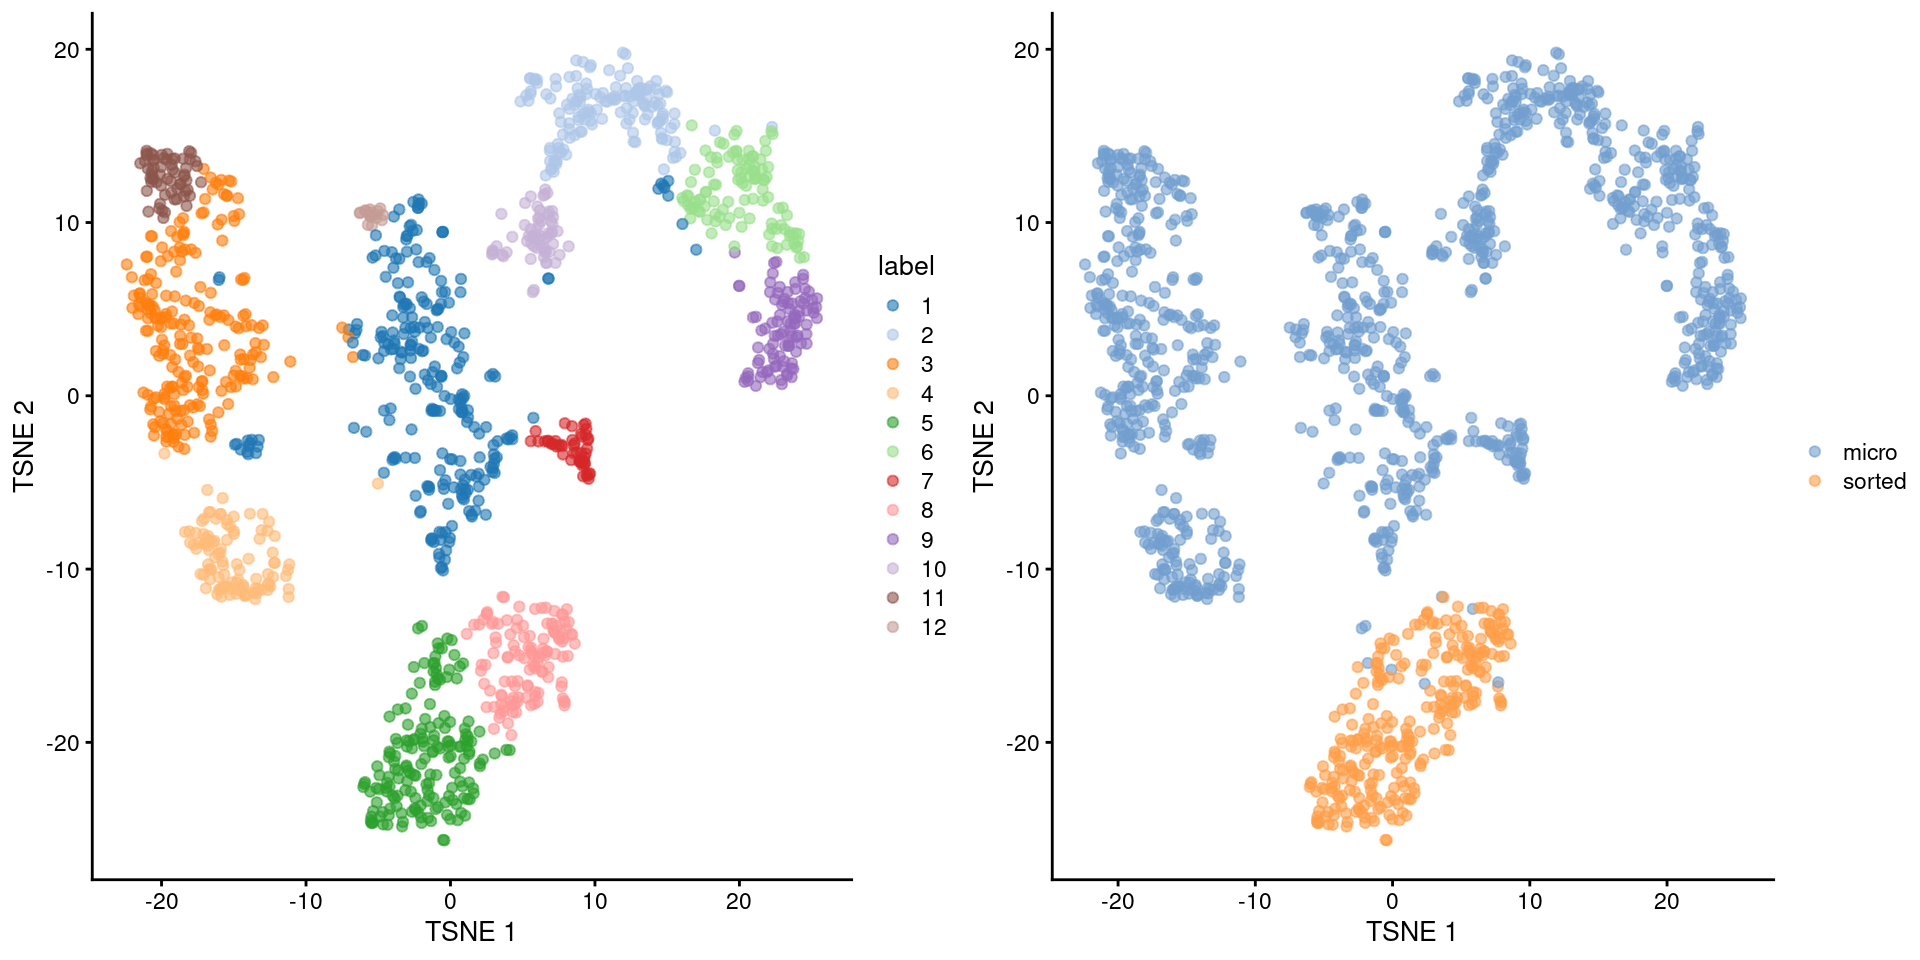 Obligatory $t$-SNE plot of the Grun HSC dataset, where each point represents a cell and is colored according to the assigned cluster (left) or extraction protocol (right).